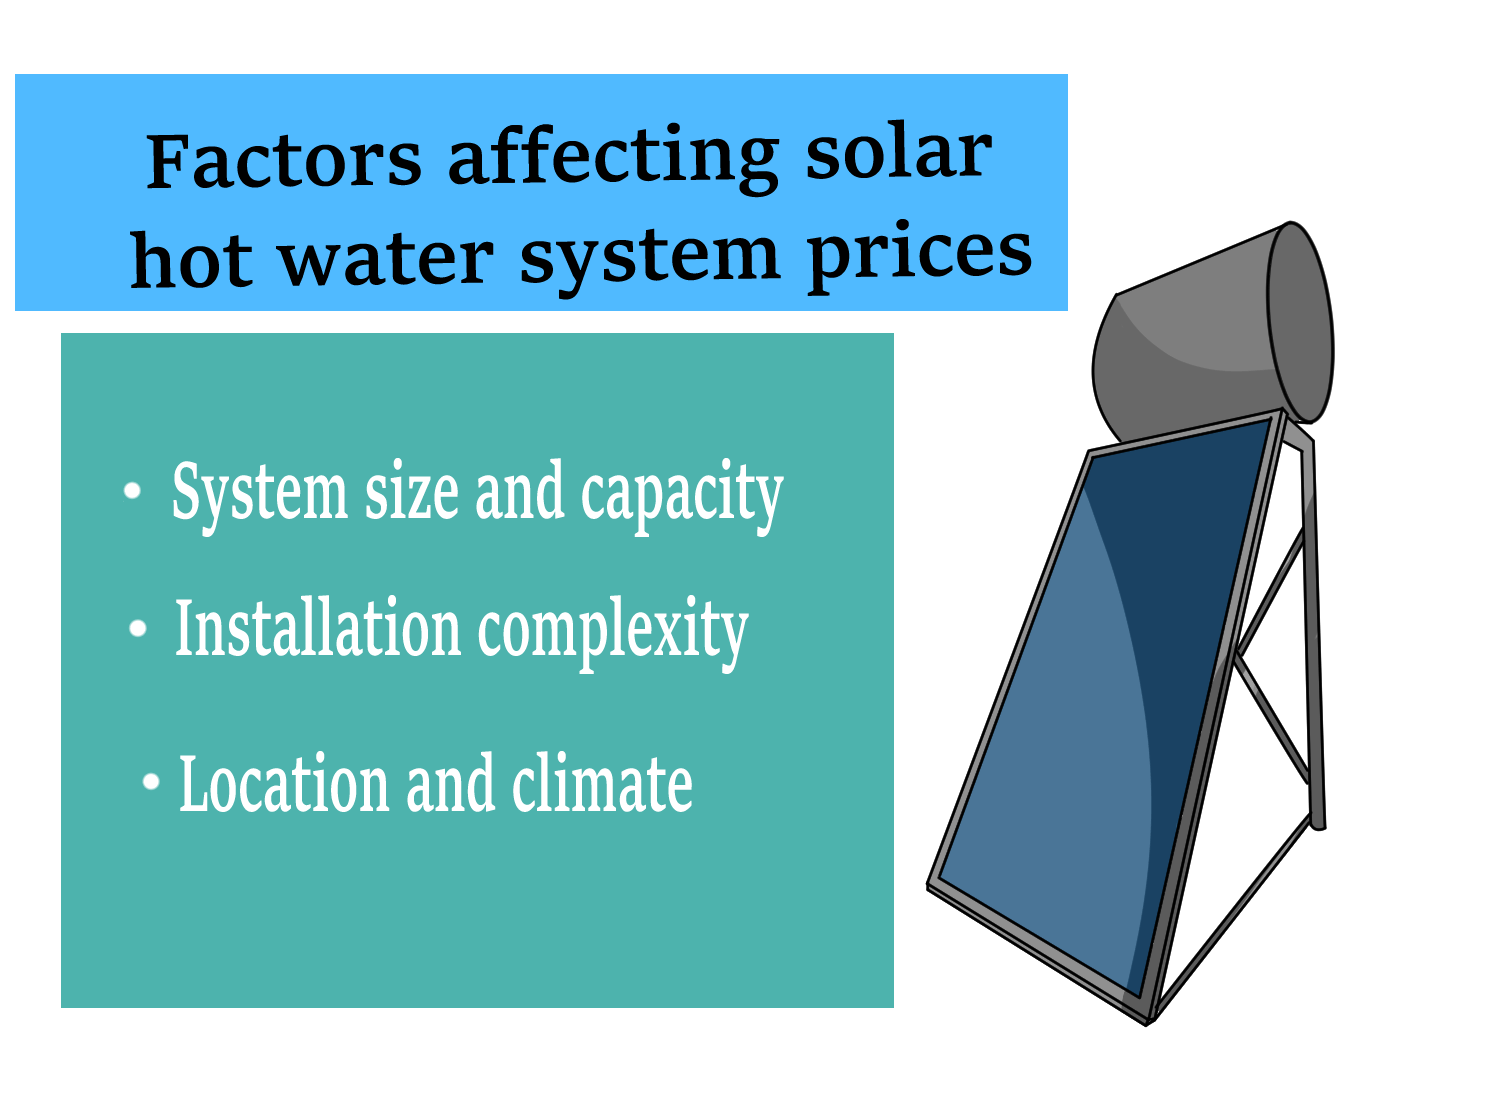 Factors affecting solar hot water system prices